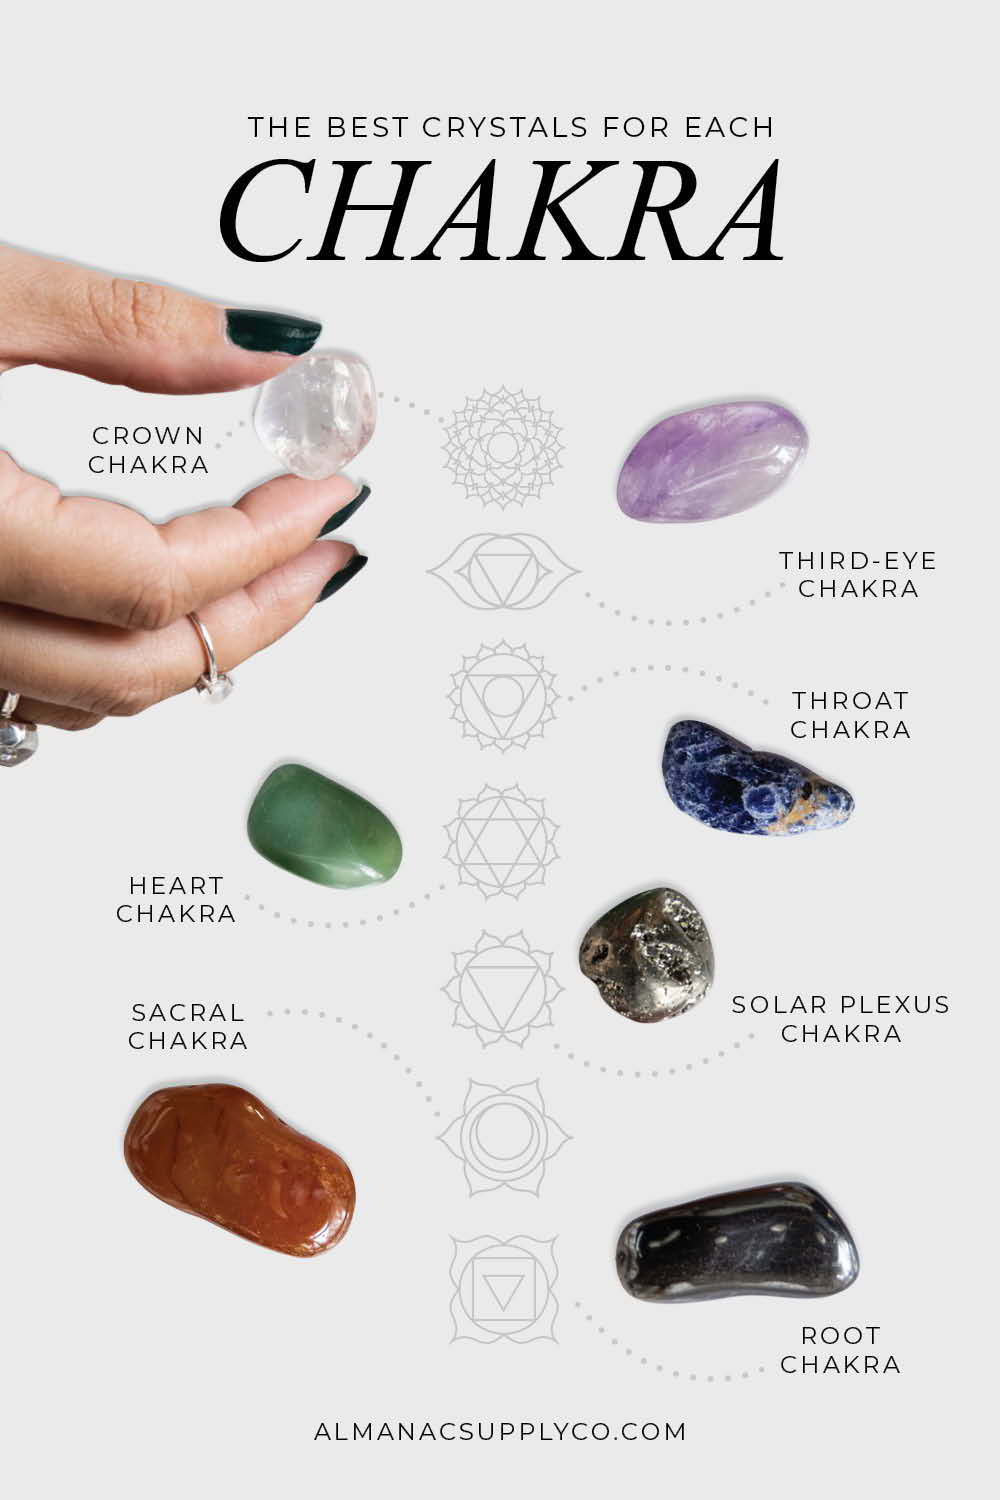 The Best Crystals for Each Chakra